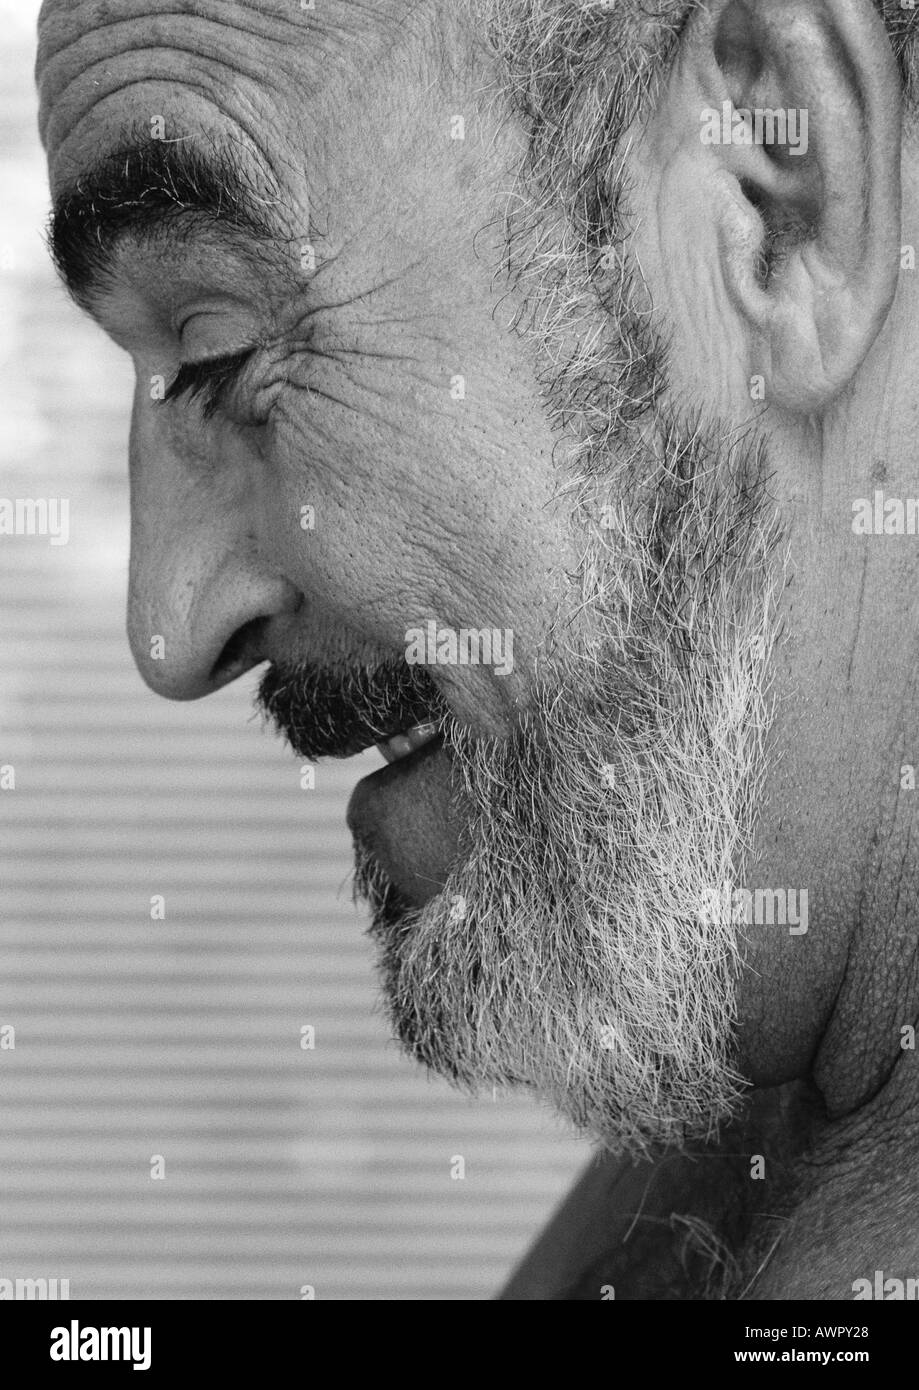 Mature man smiling, side view, close-up, b&w. Stock Photo